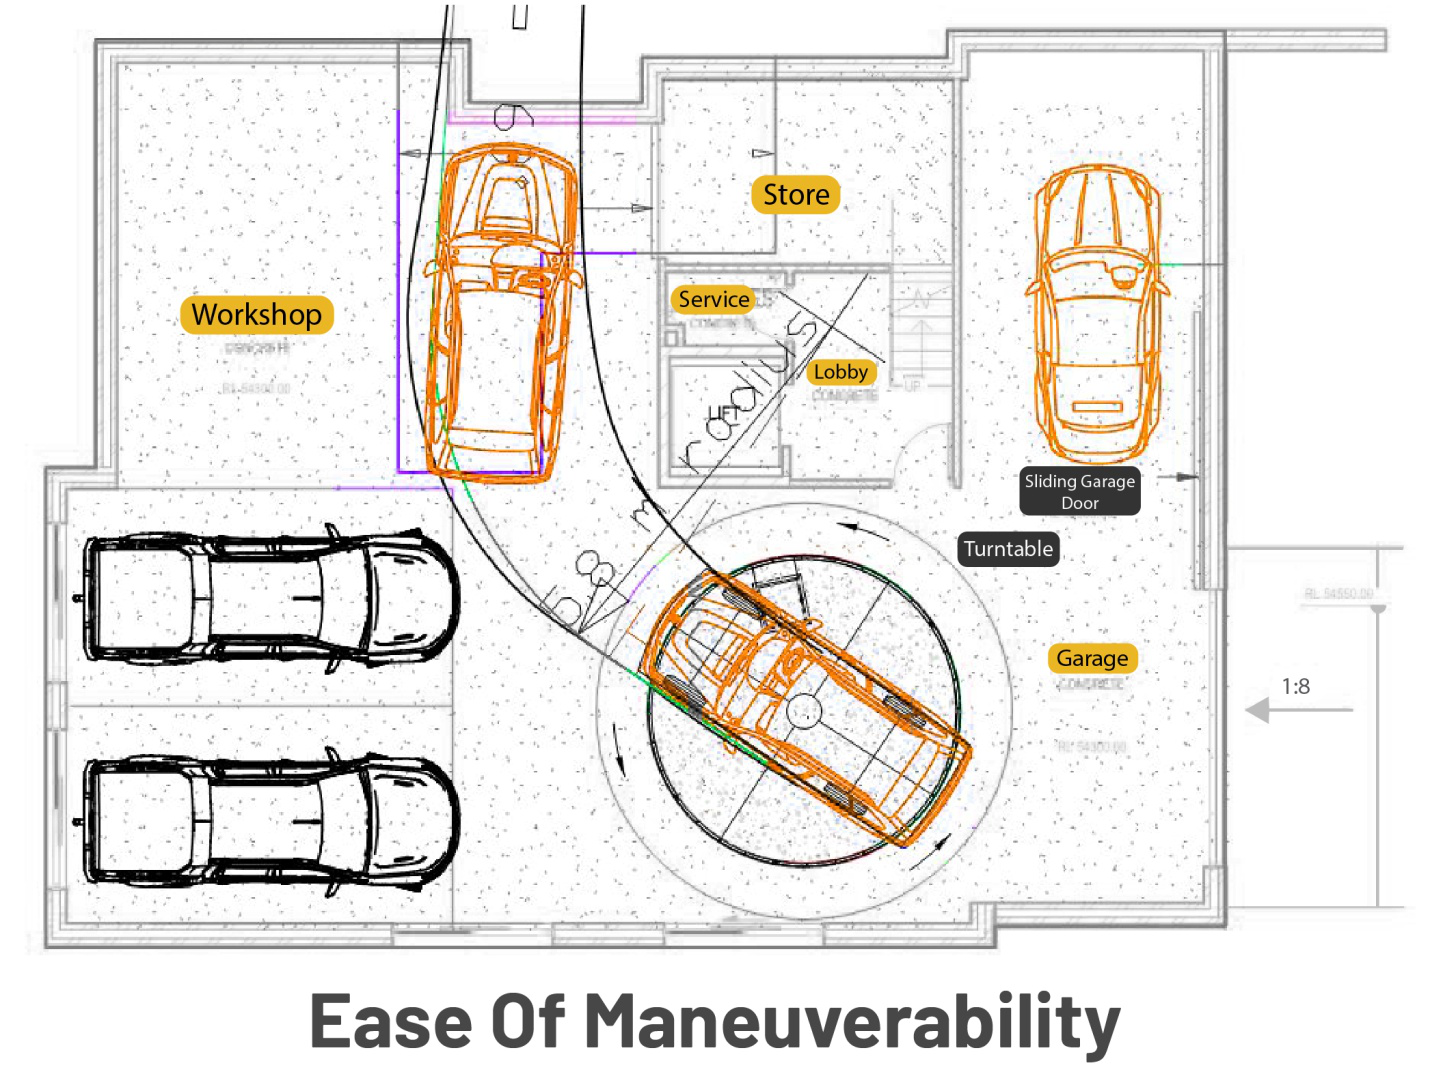 An infographic showing how a vehicle turntable can enable ease of maneuverability